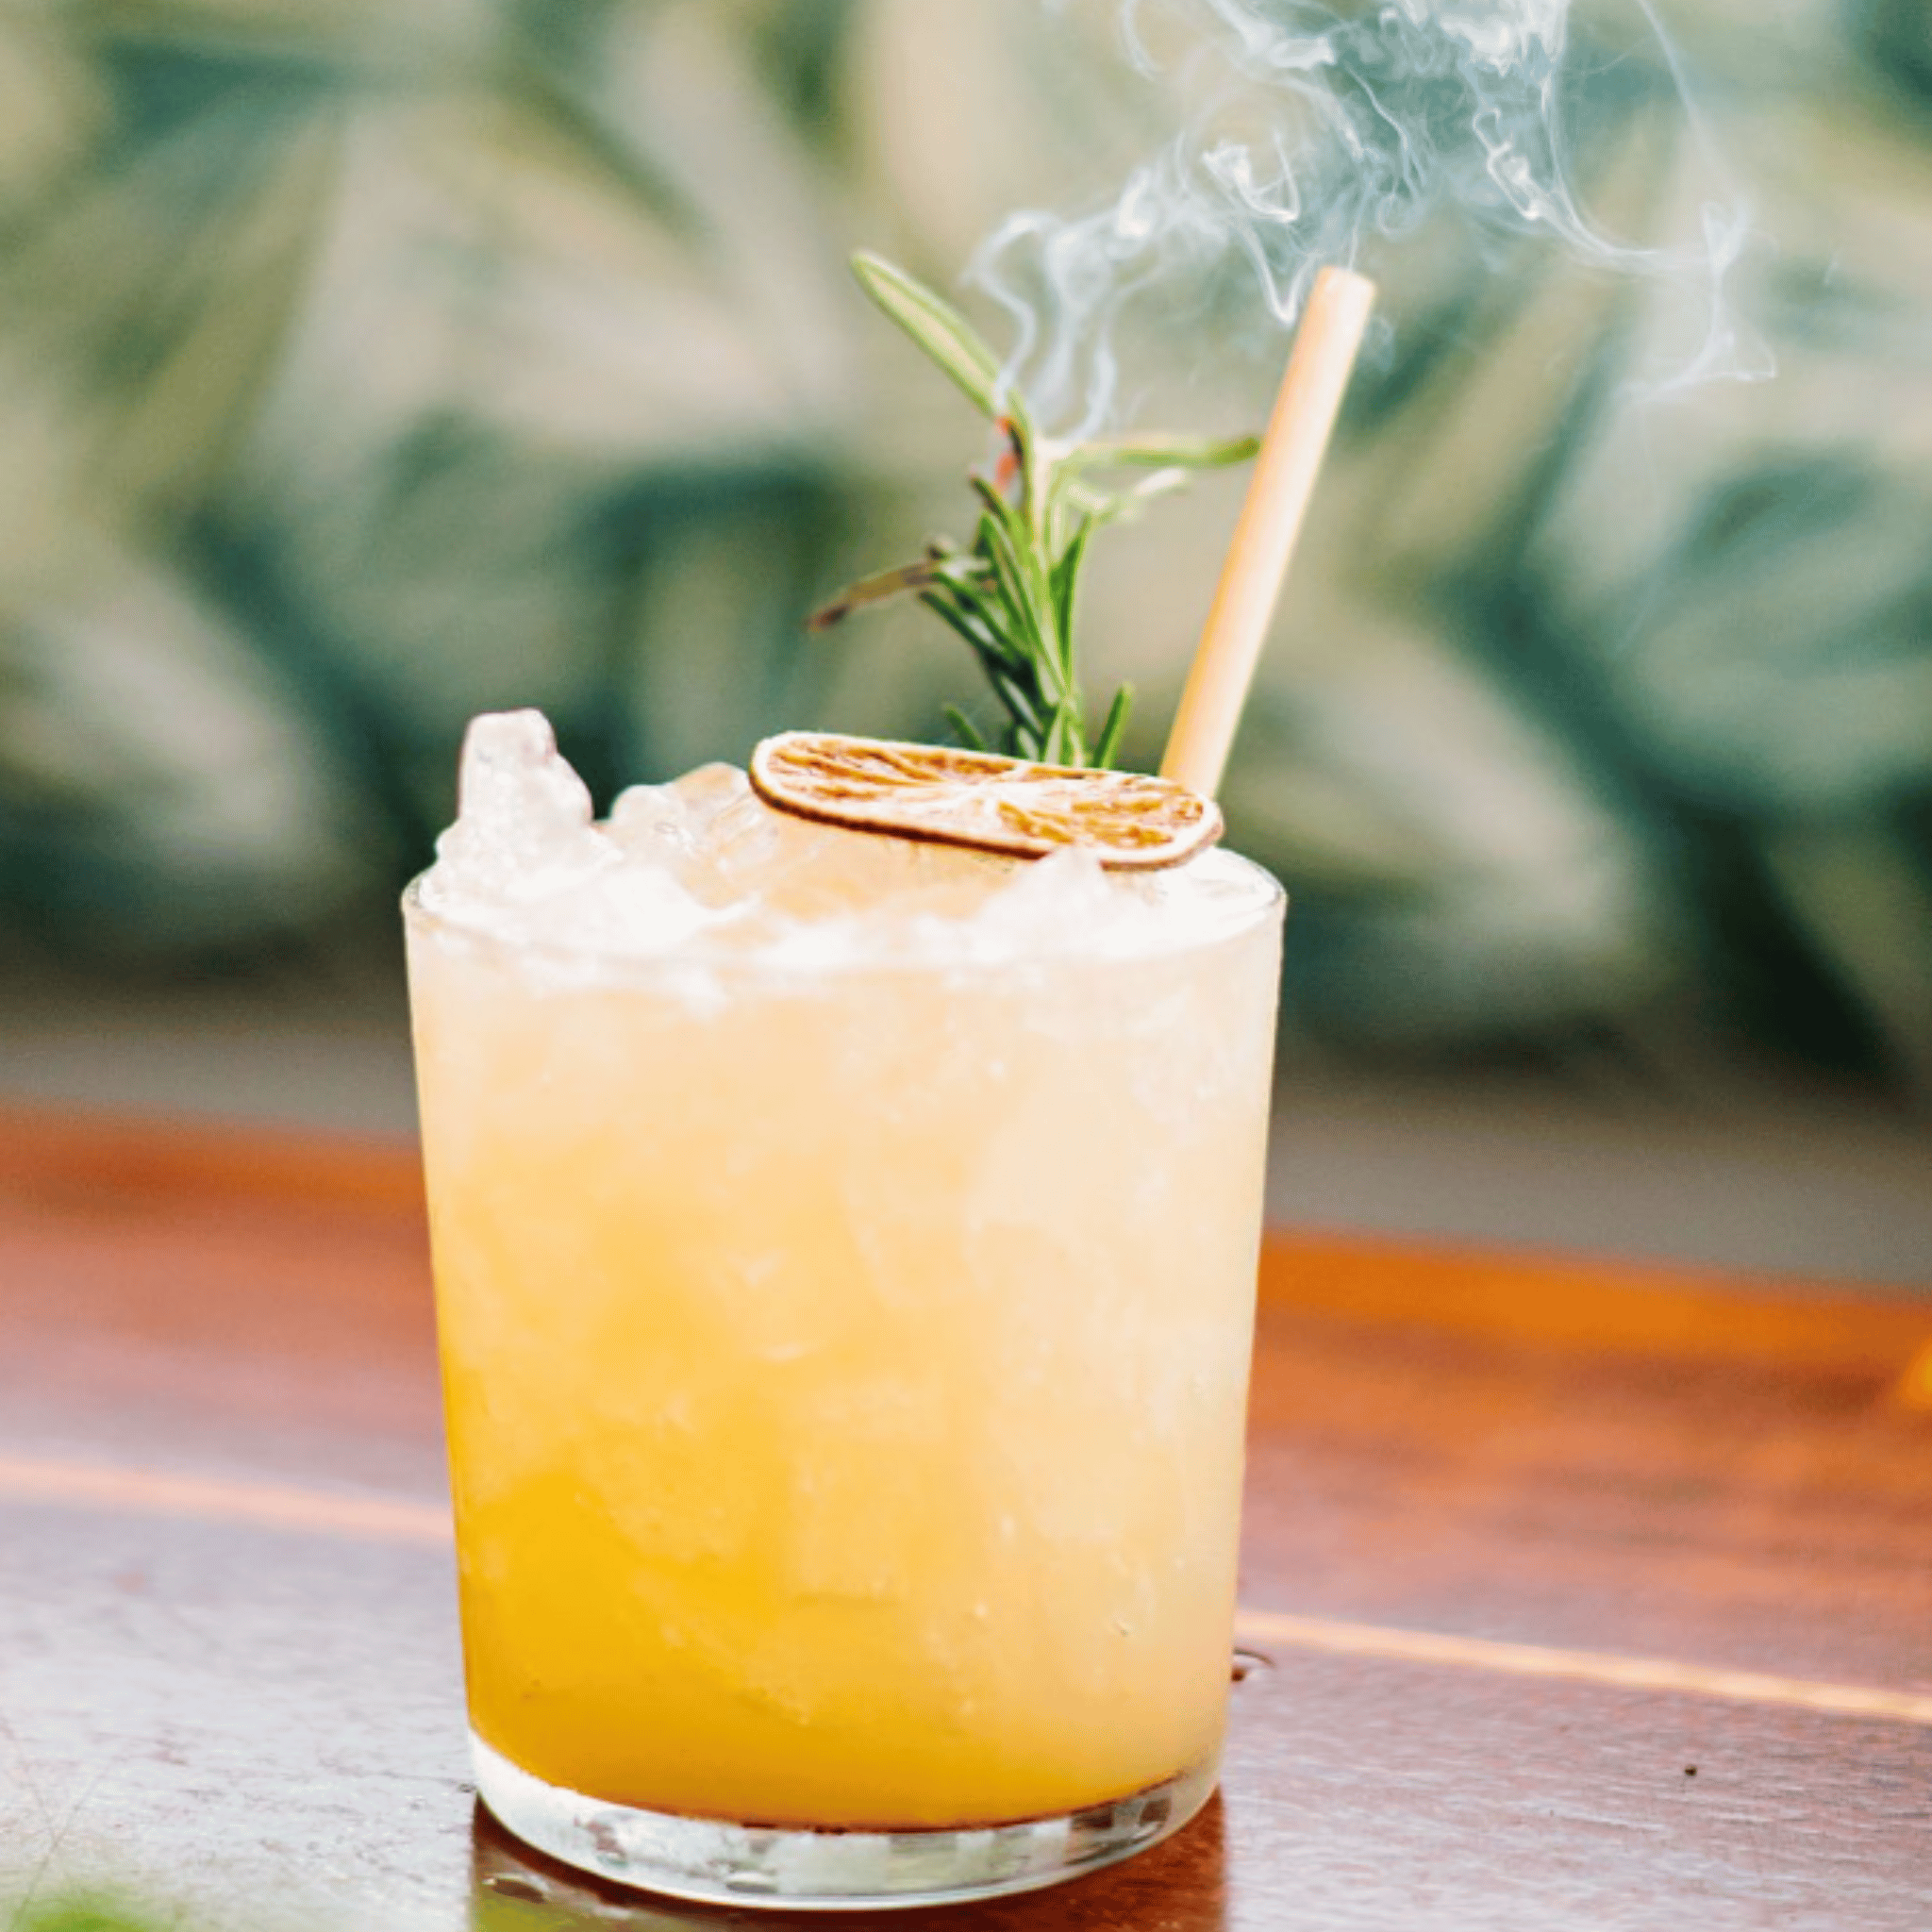  An iced cocktail garnished with a sprig of rosemary and a dried citrus slice sits on a wooden table. The glass has a skinny reed straw, and smoke from the herb adds a touch of flair, highlighting a lush green background.